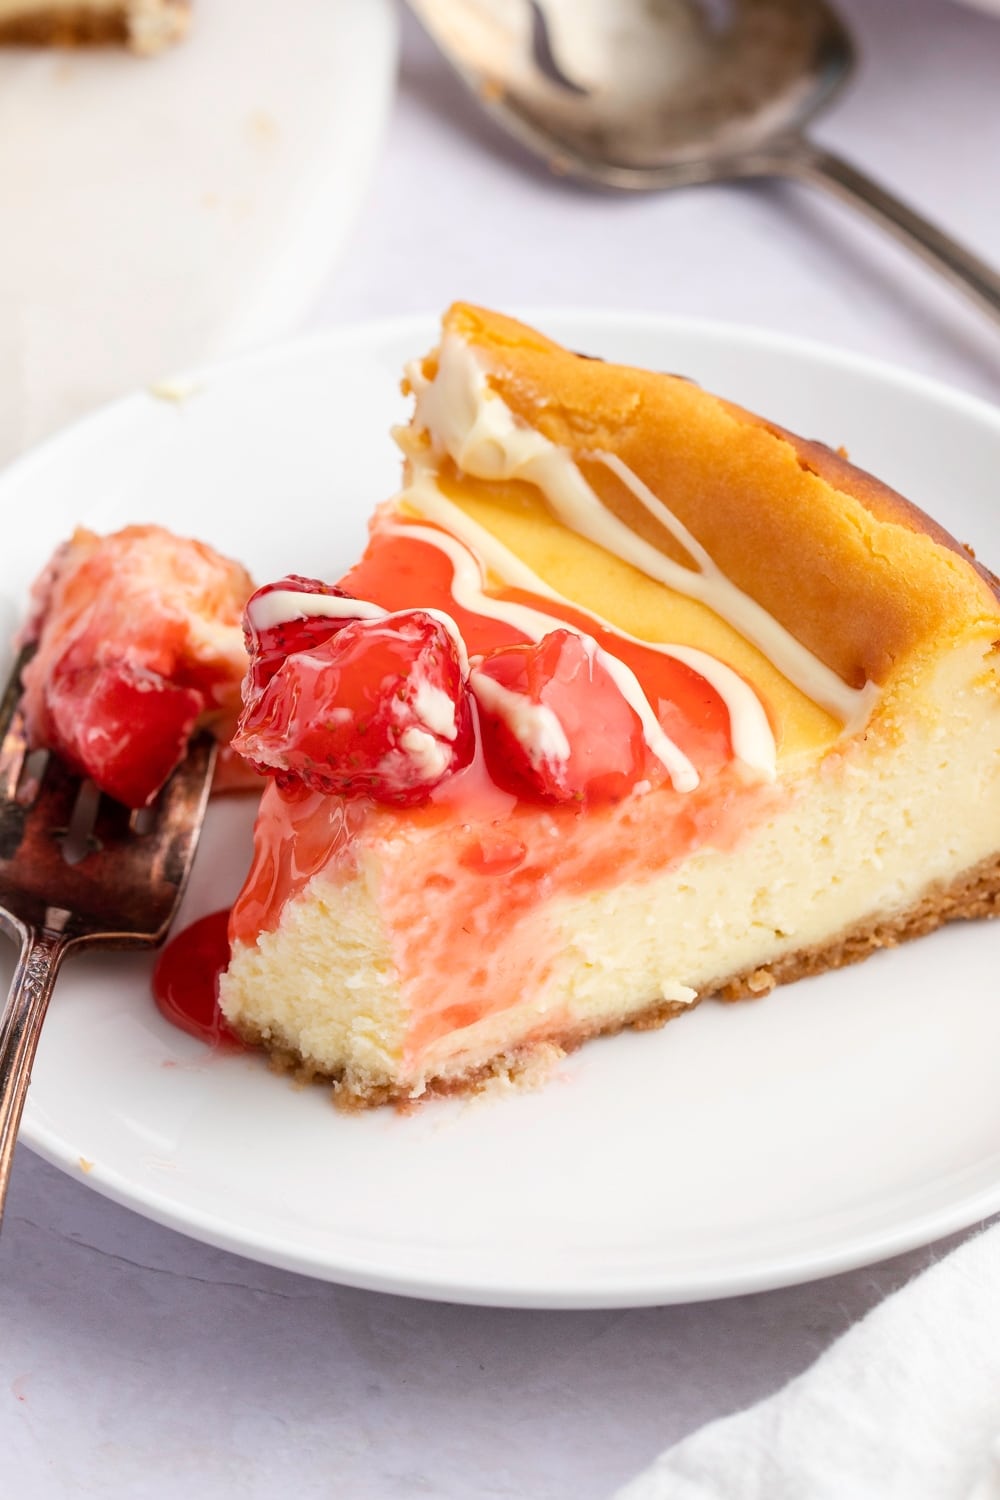 A Slice of White Chocolate Cheesecake with Strawberry Sauce Served on a White Plate